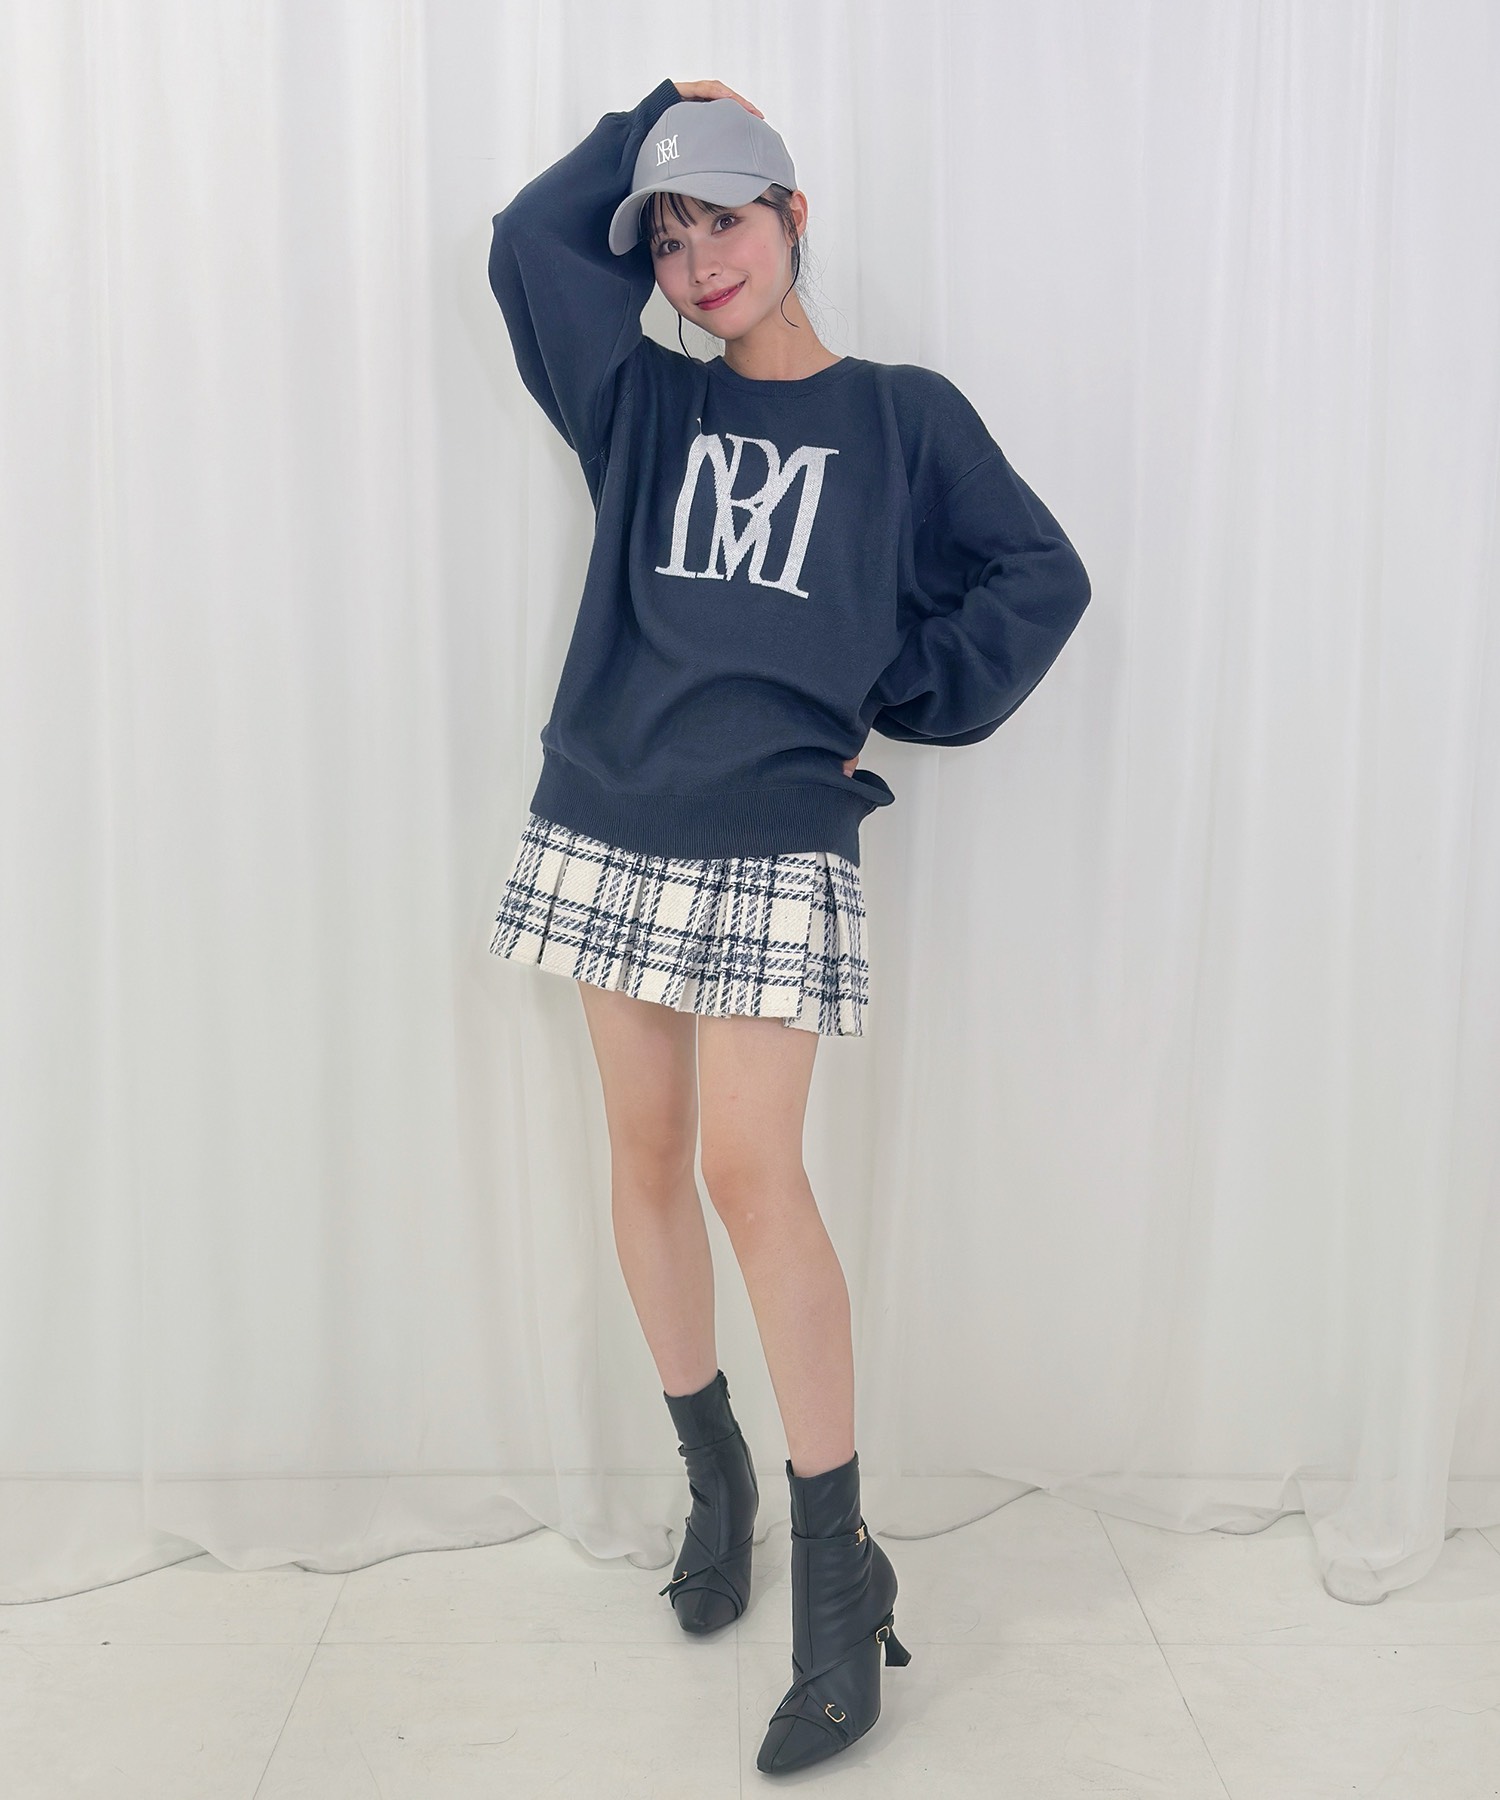 Rosé Muse RM logo knit_L size【navy】ロゼミューズ - dso-ilb.si